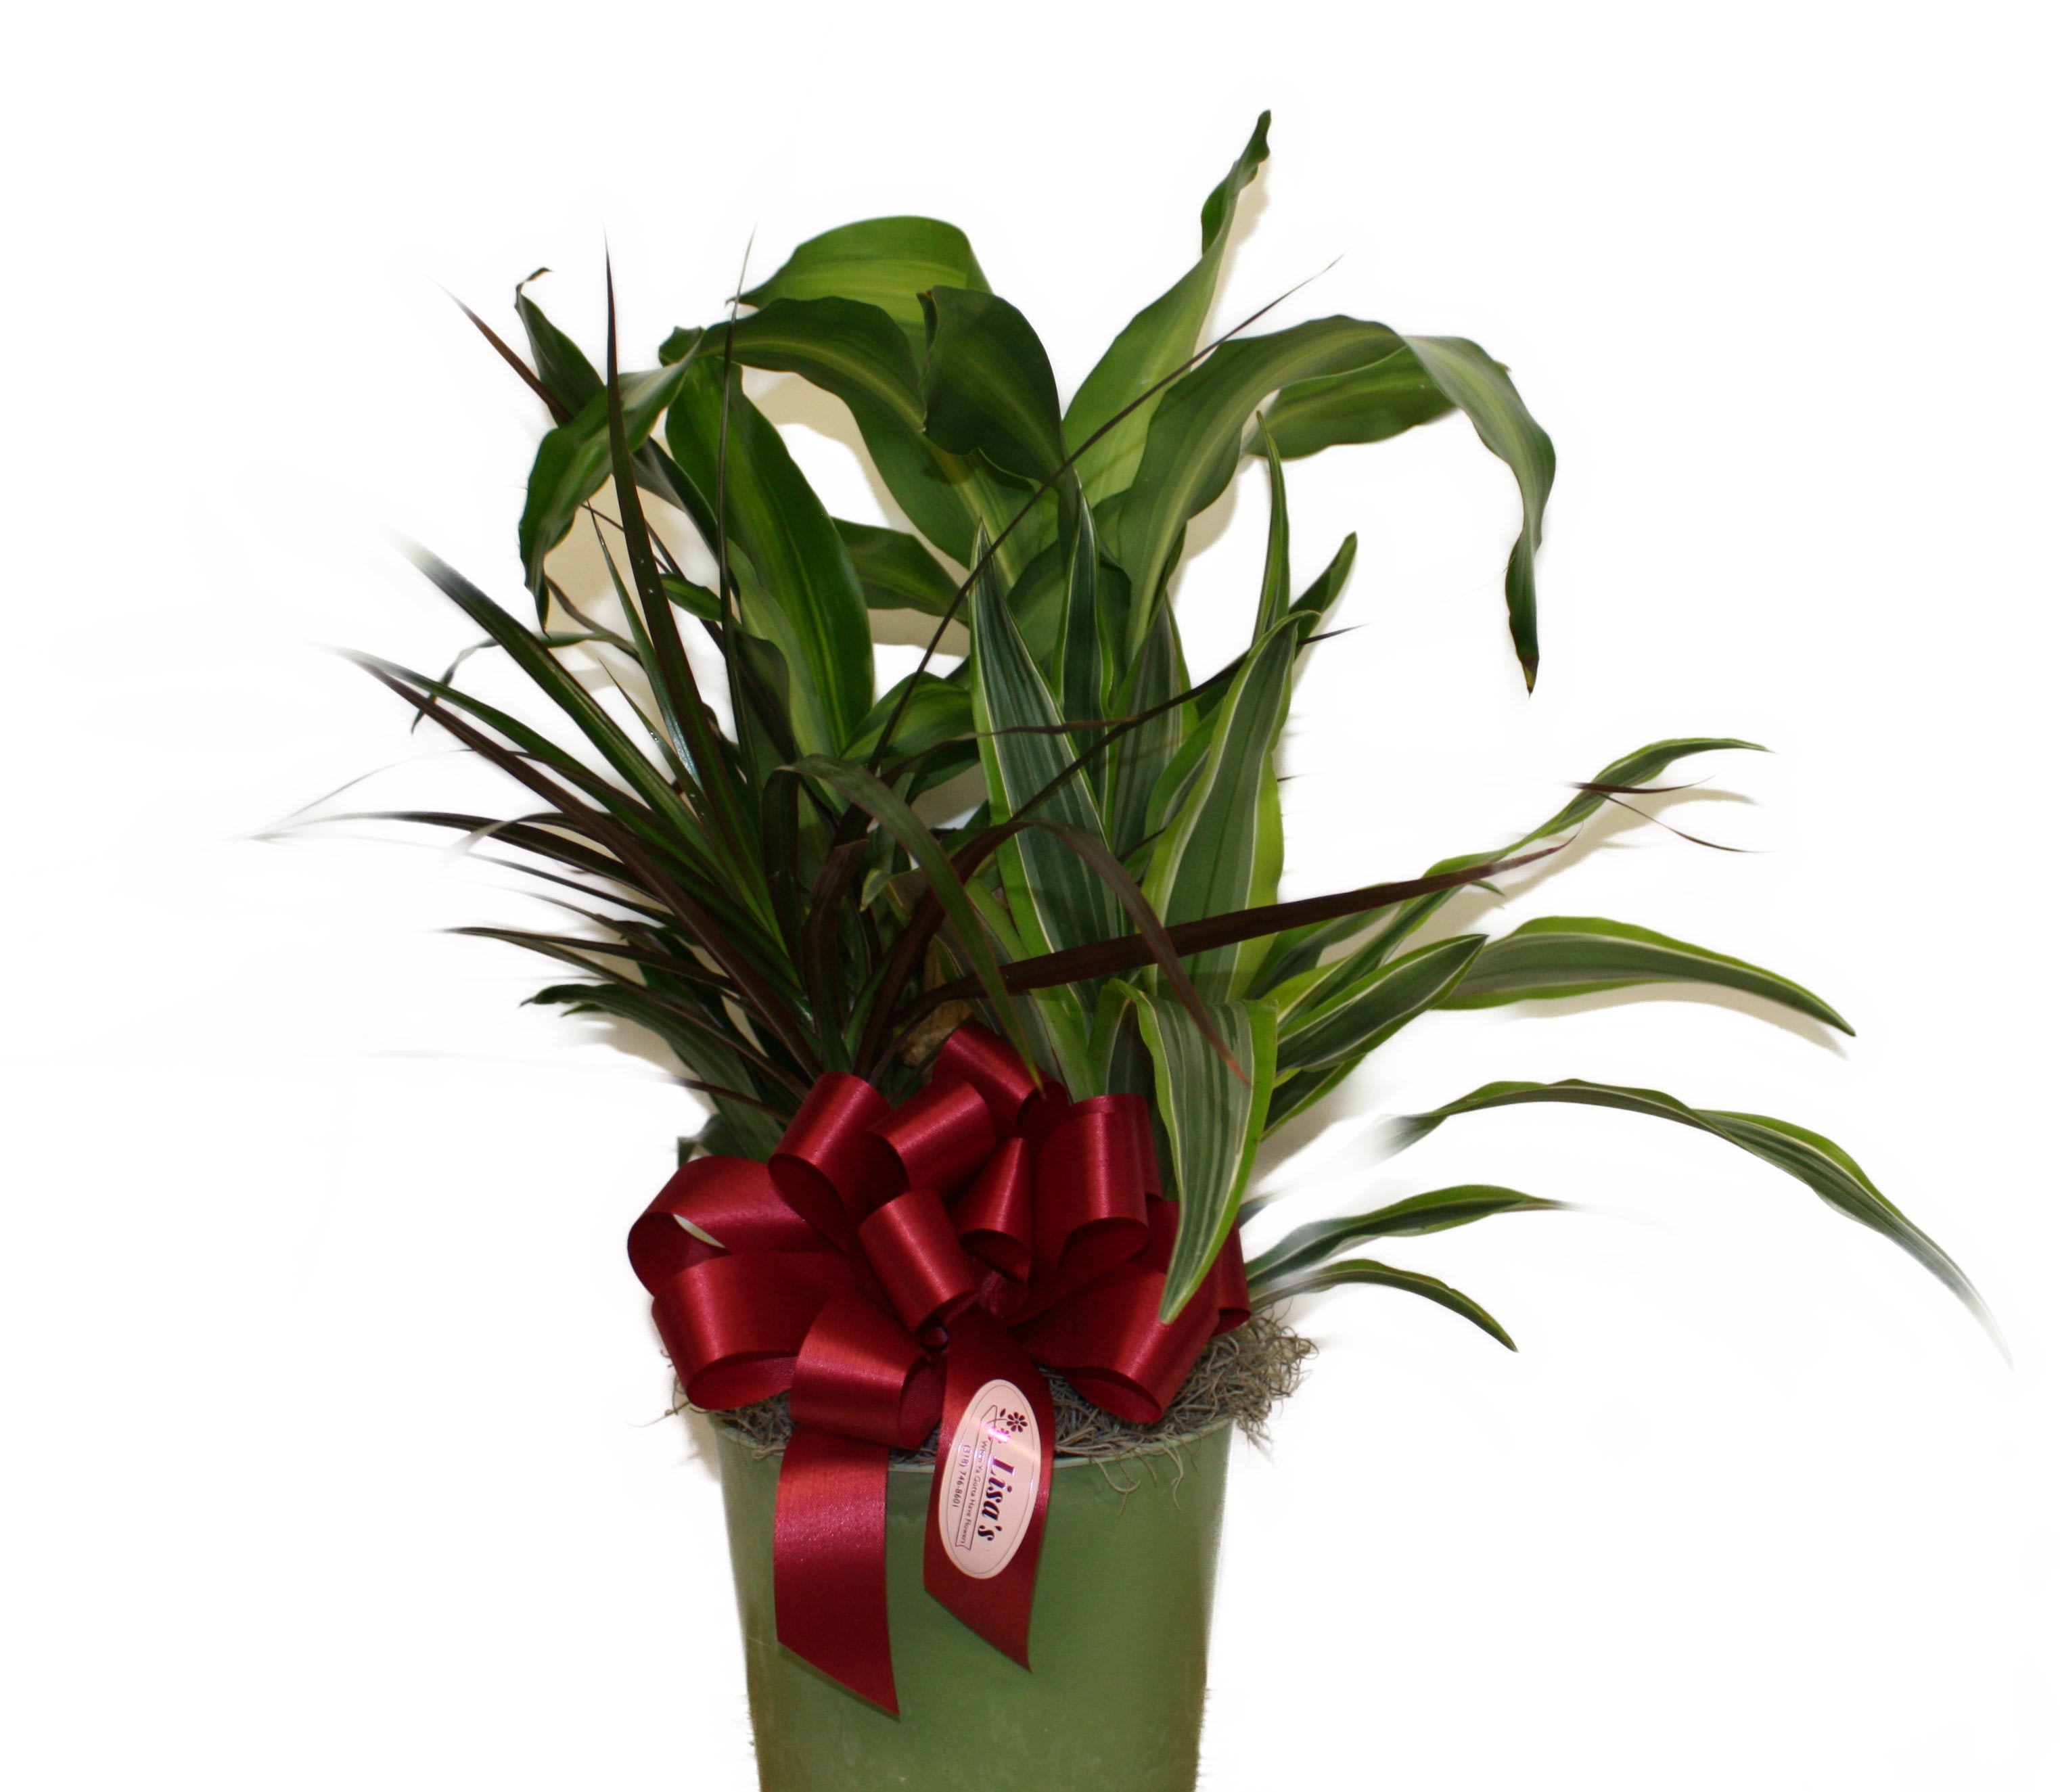 Corn Plant Combo - This Corn Plant Combo is a mix of stunning corn plant (Dracaena fragrans), Dracaena Marginata Cane, and Dracaena Lemon Limein a decorative container. Dracaena's are some of the easiest and most common houseplants available. Its lush appearance and air-purifying qualities make it a popular choice for any space.